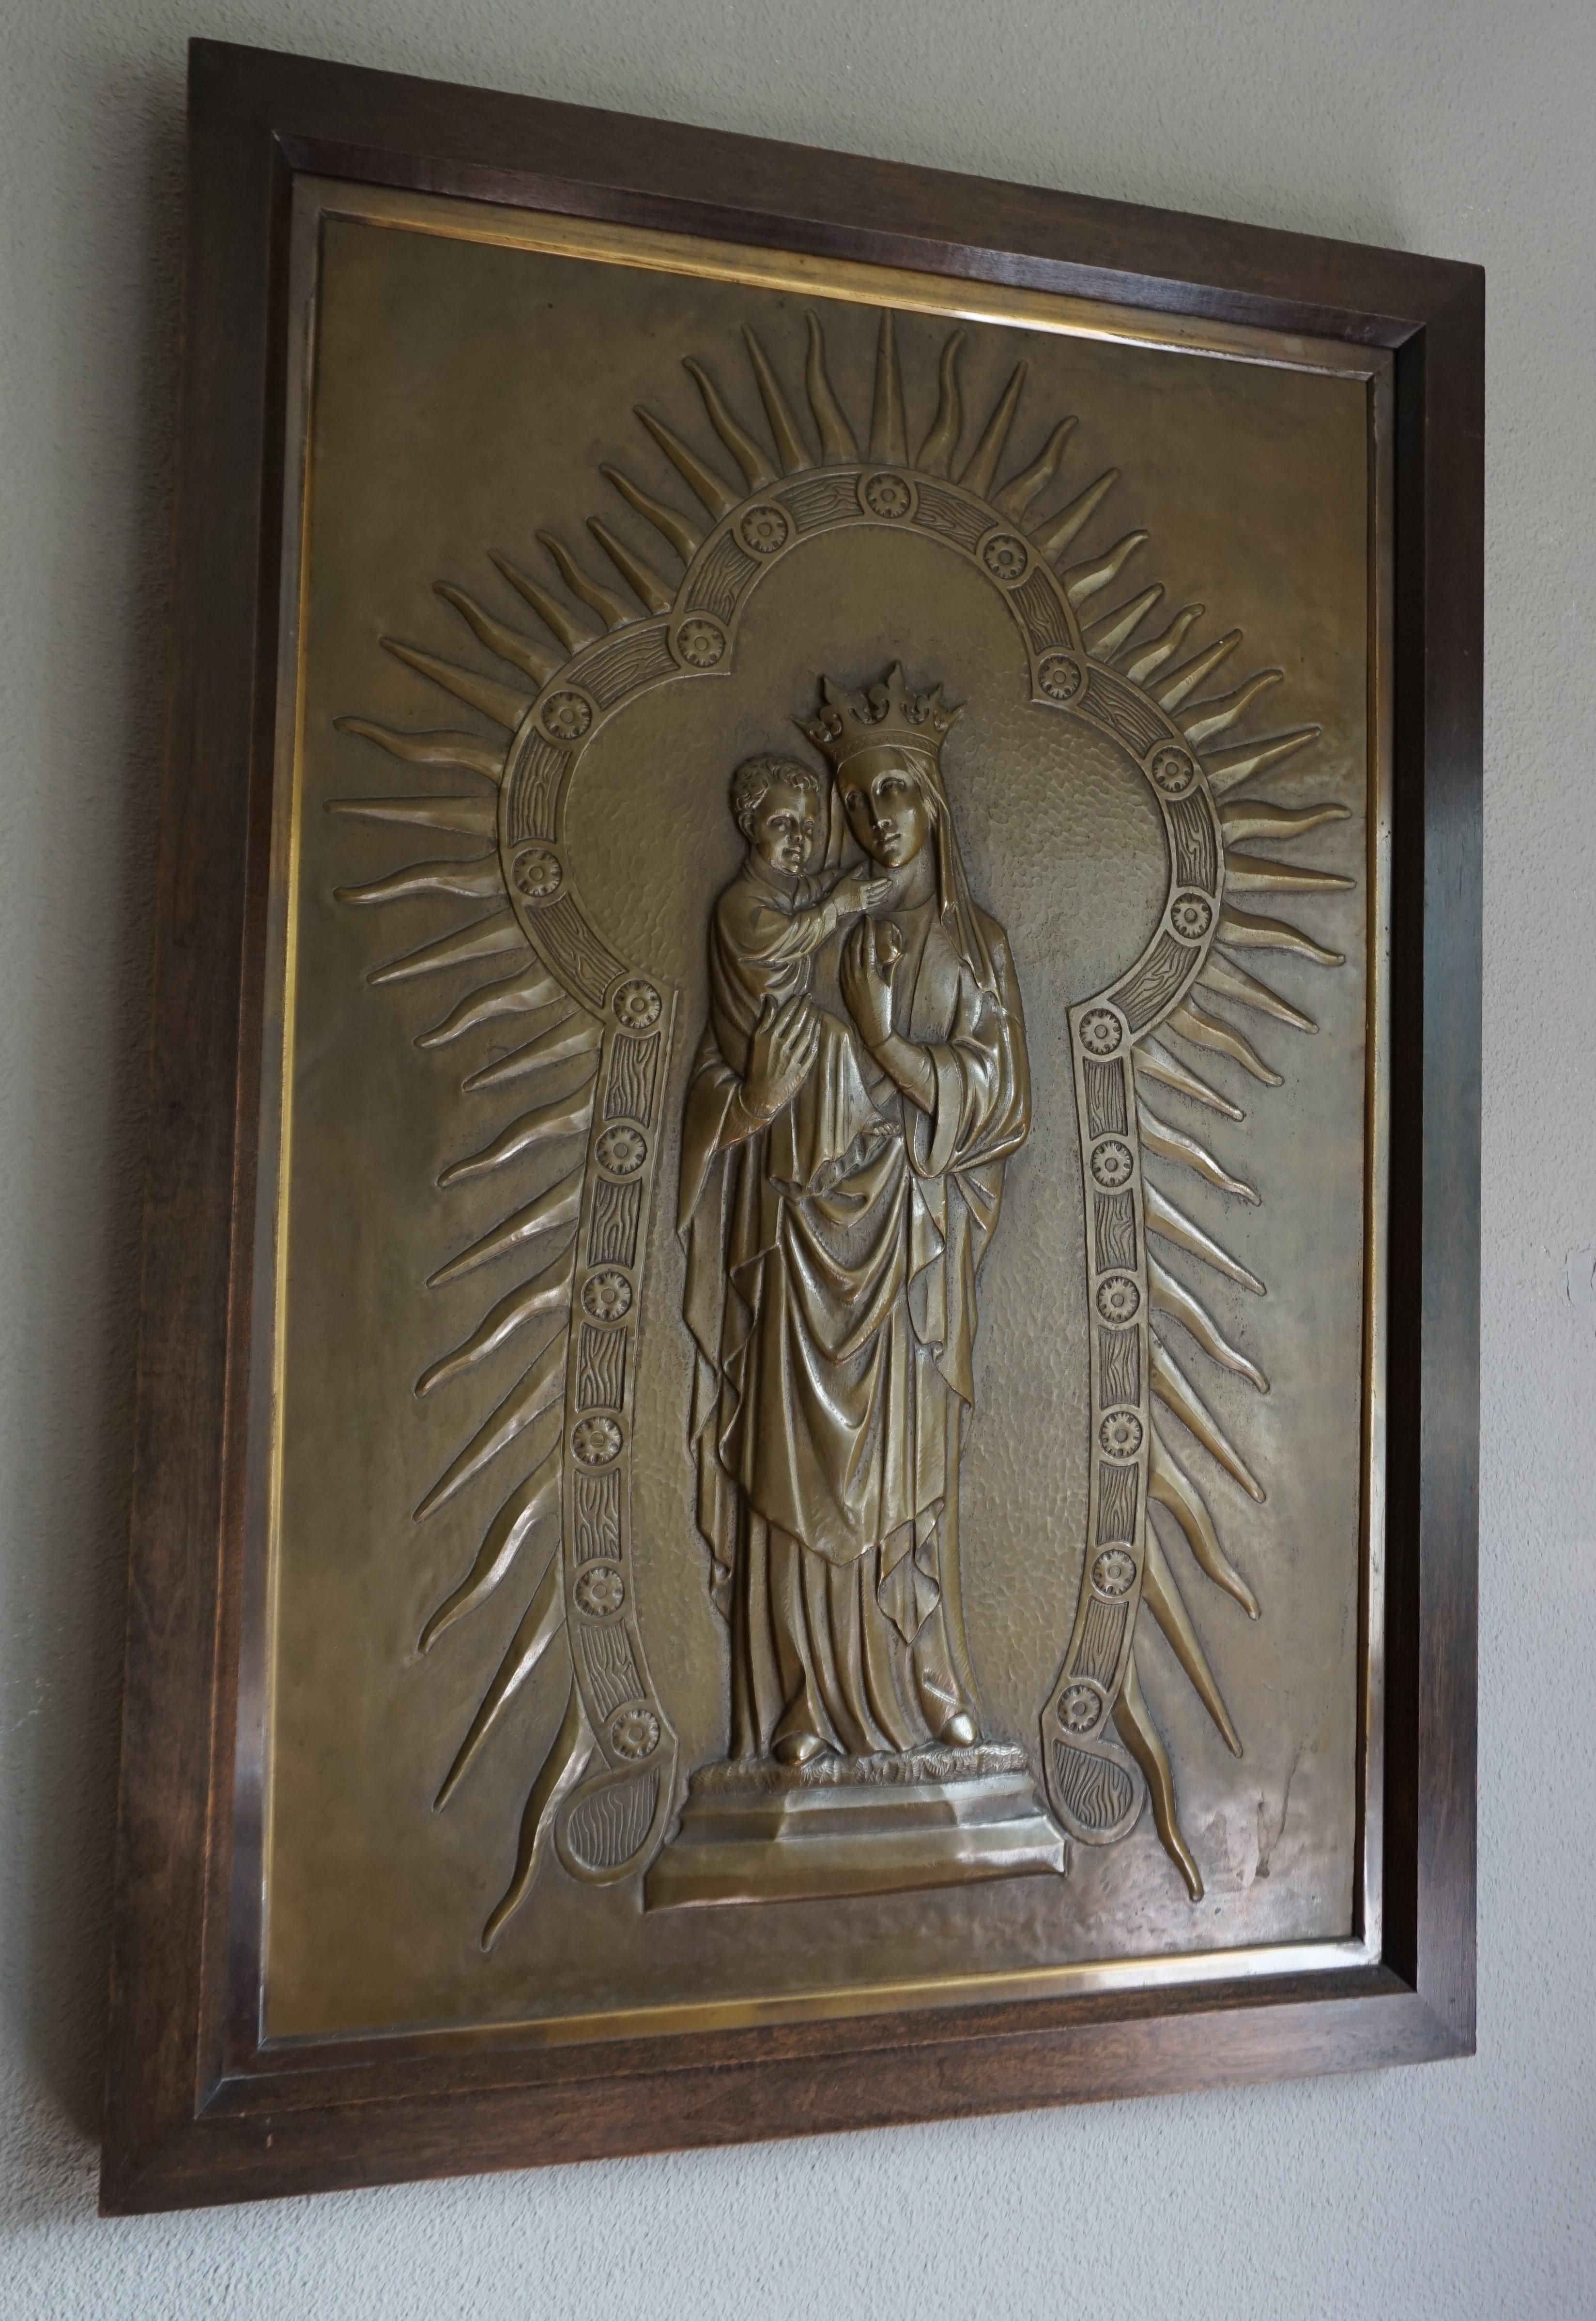 All handcrafted and stunning Mary and Child wall sculpture from the 1800s.

With antique church relics being one of our specialities, we have seen Mary and Her child Jesus depicted in all kinds of ways and from all kinds of materials. However, we